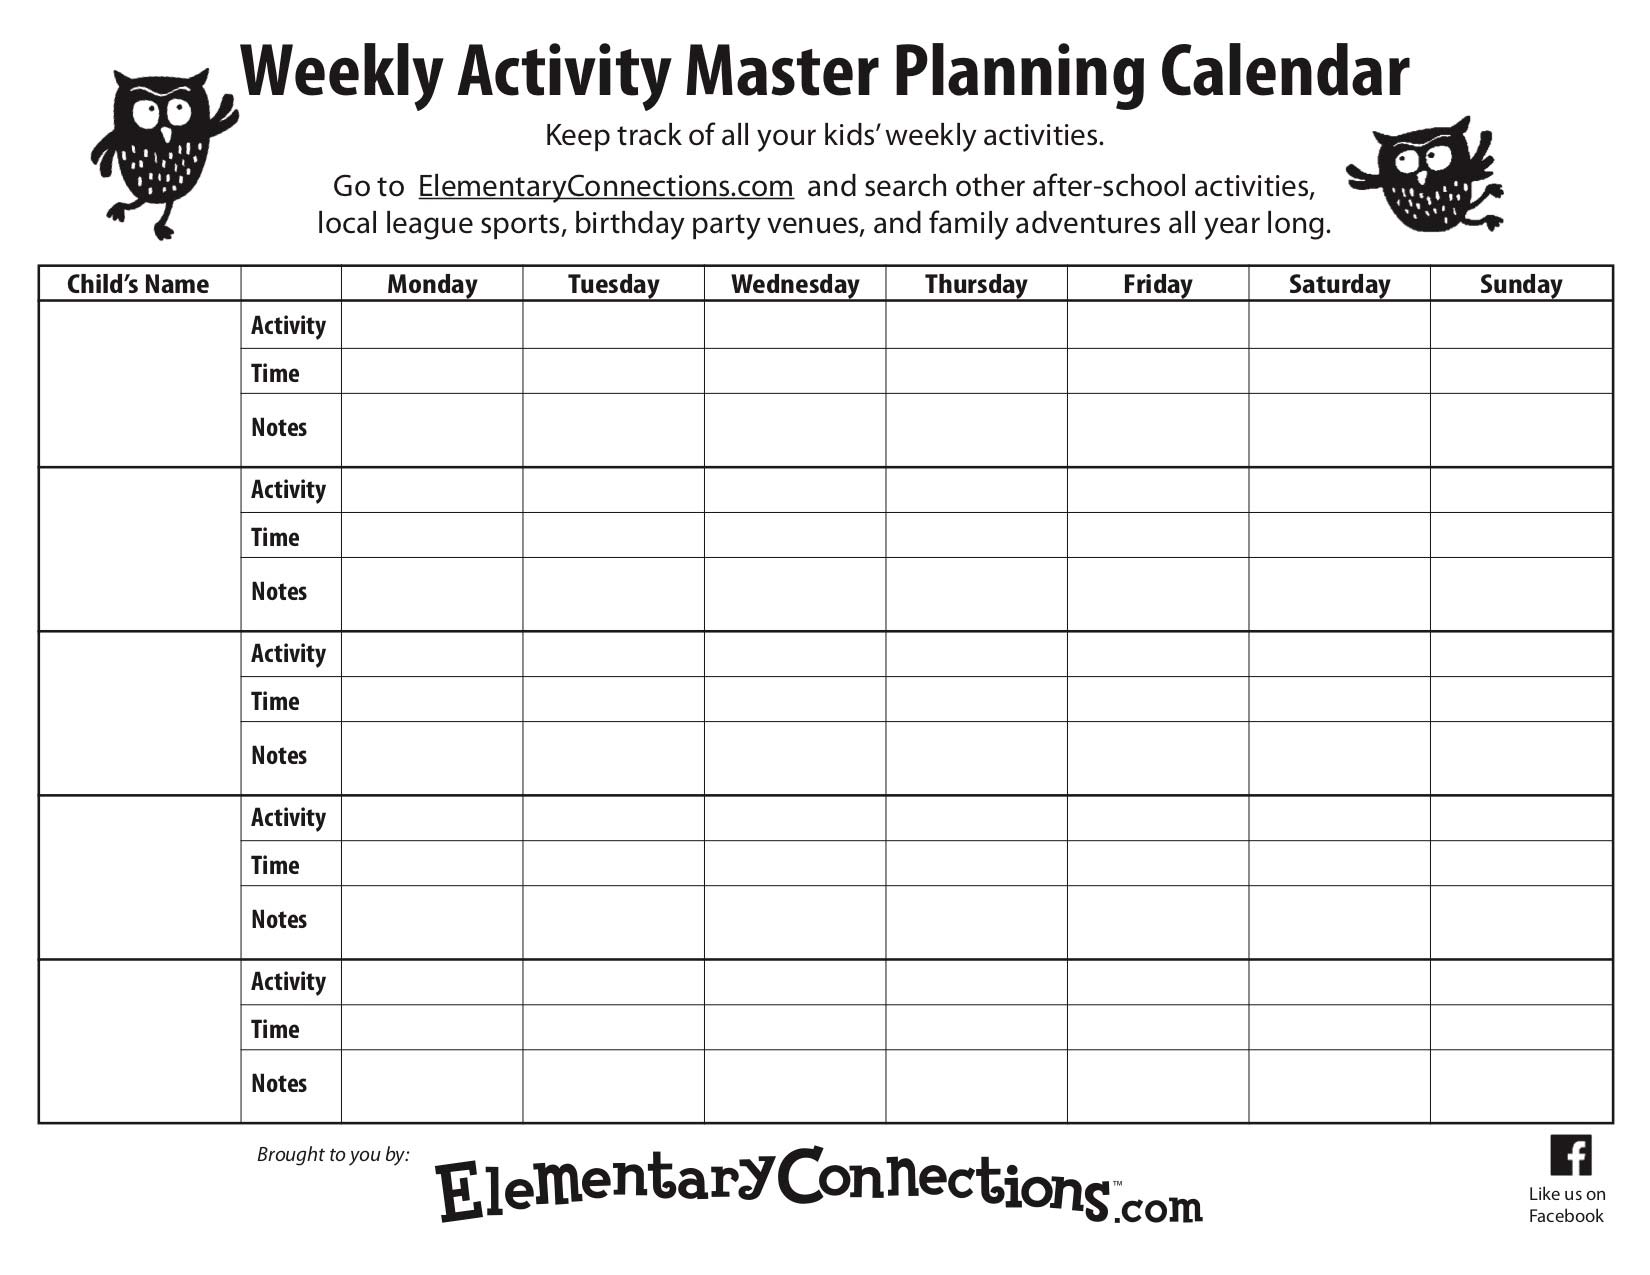 Graphic showing the Elementary Connections weekly activity master planning calendar